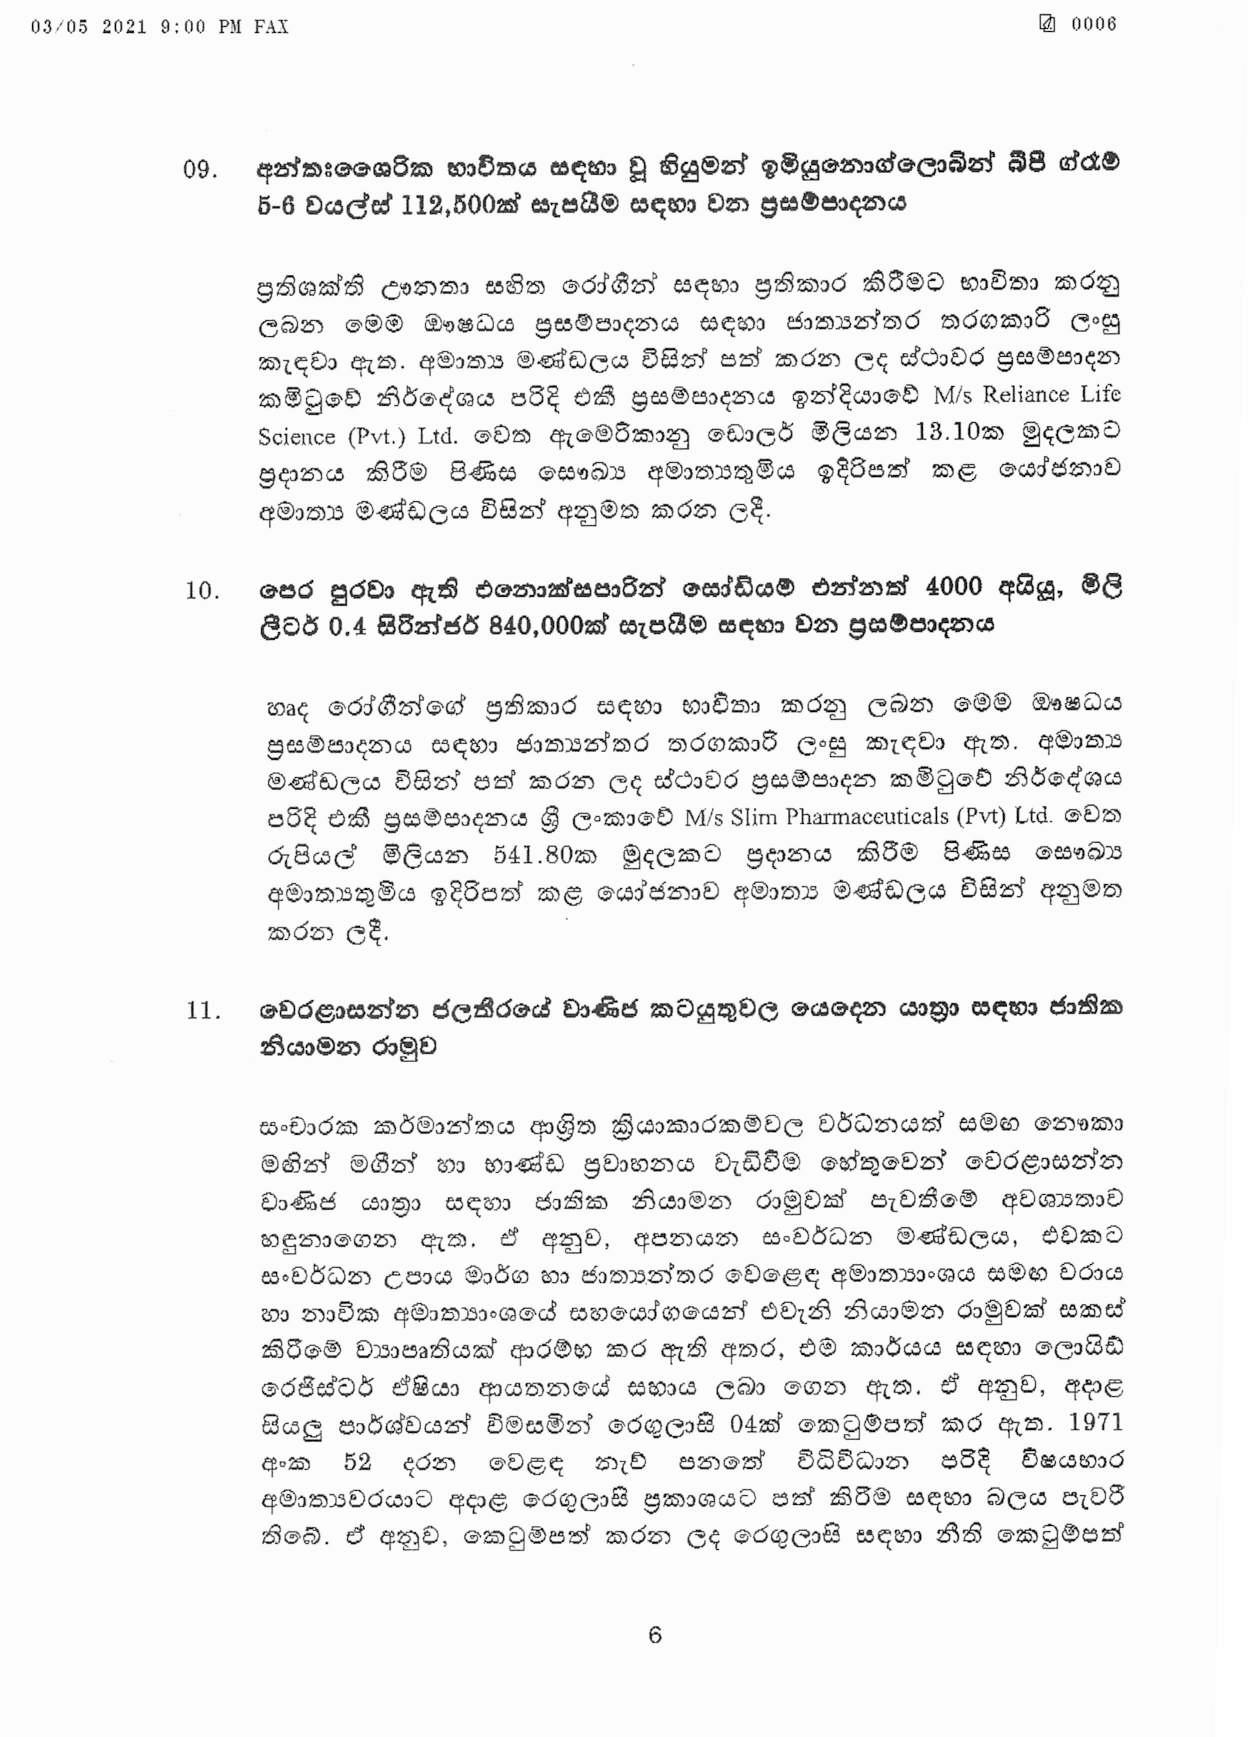 Cabinet Decision on 03.05.2021Sinhala page 006